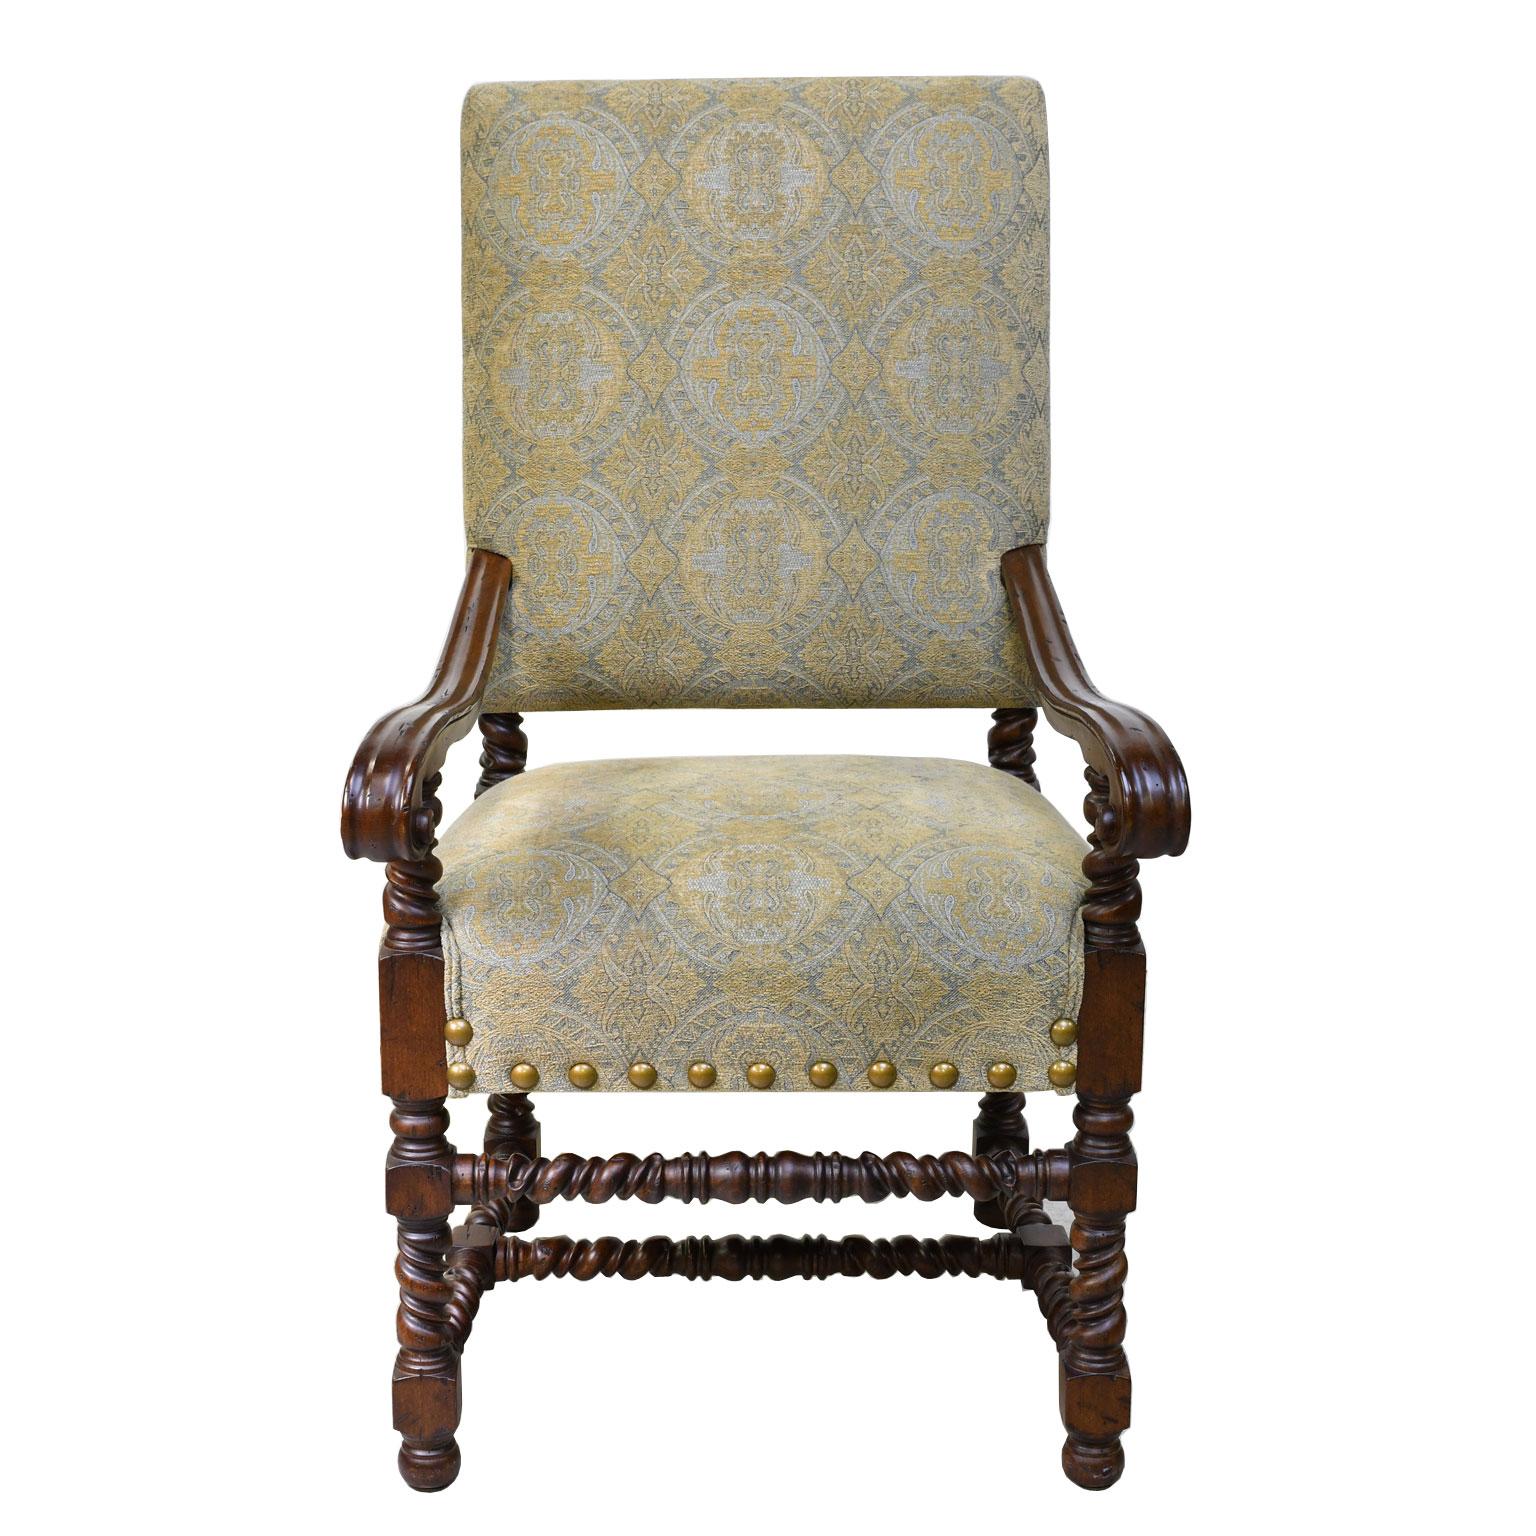 Set of Ten Upholstered Tudor-Style Dining Chairs with Turned Legs & Stretcher 2